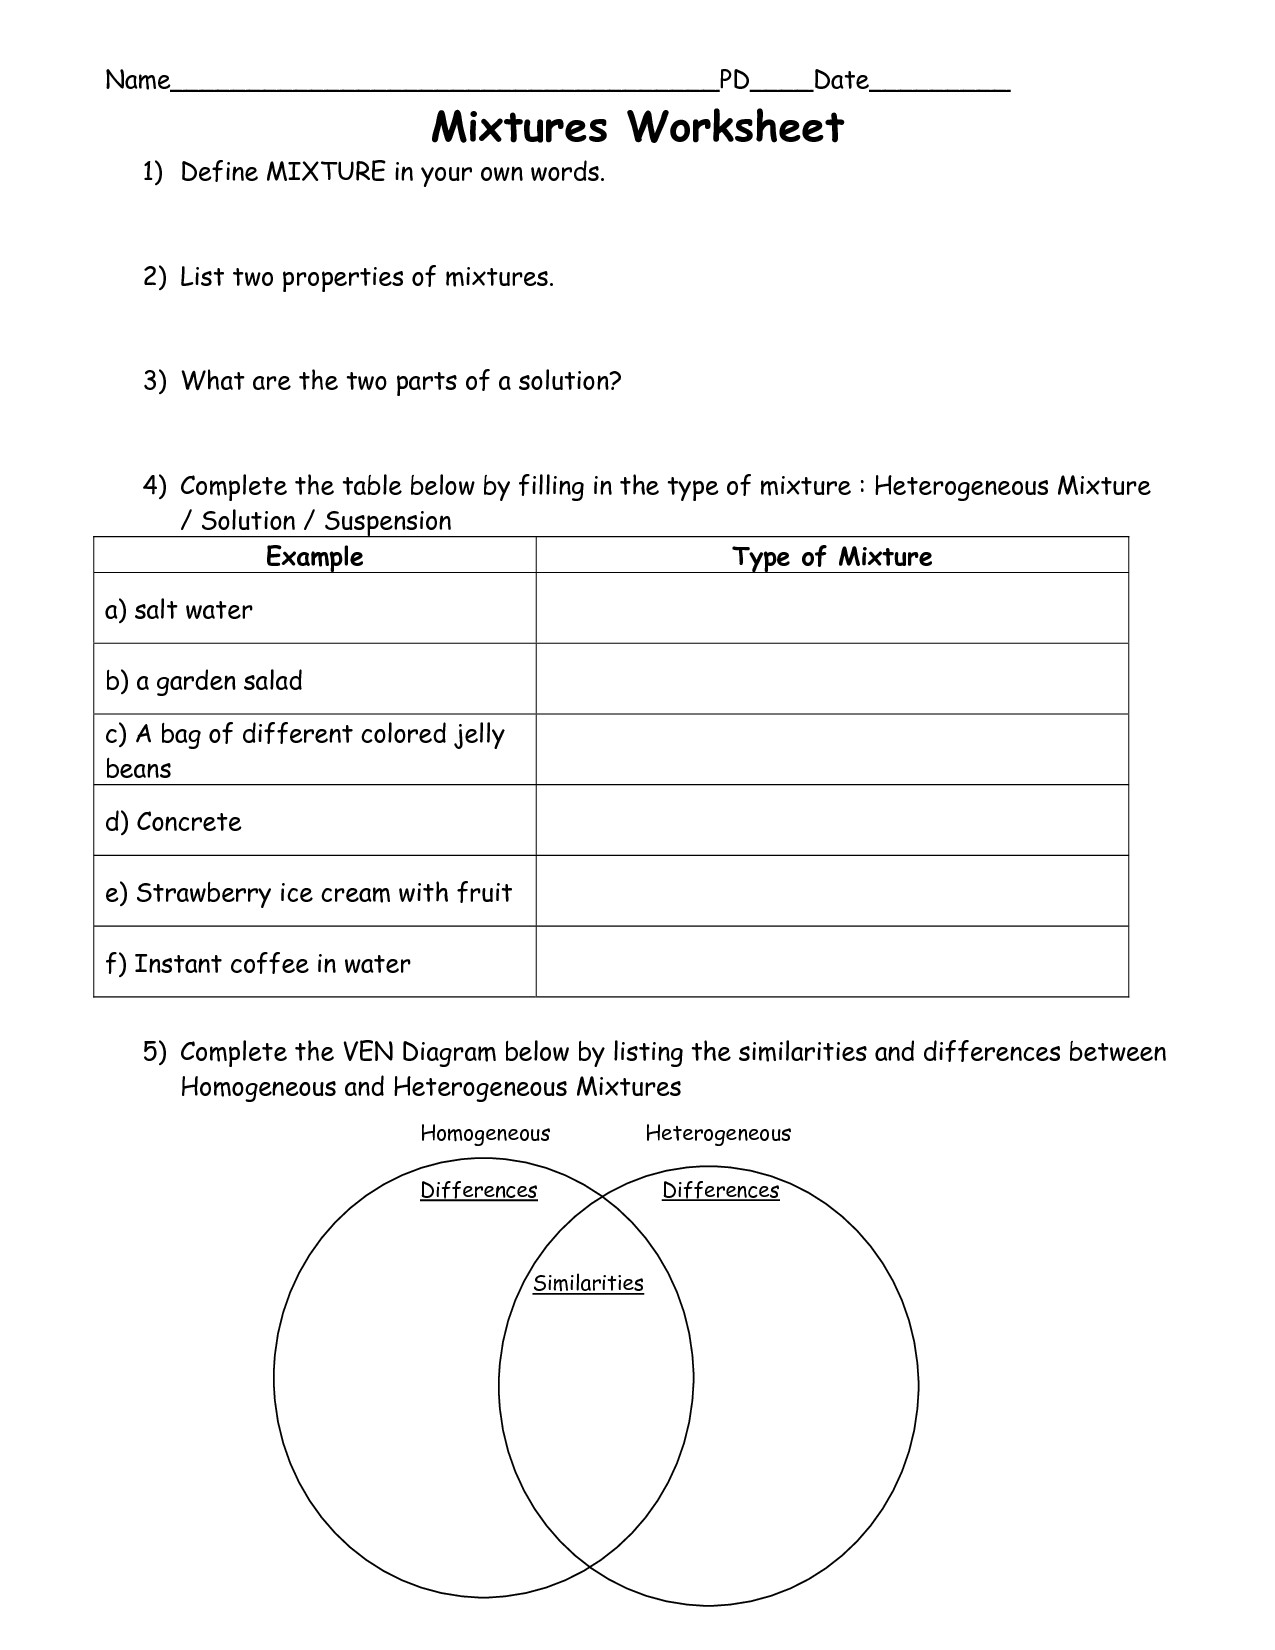 Mixtures and solutions Worksheet Answers Awesome Water and solutions Worksheet